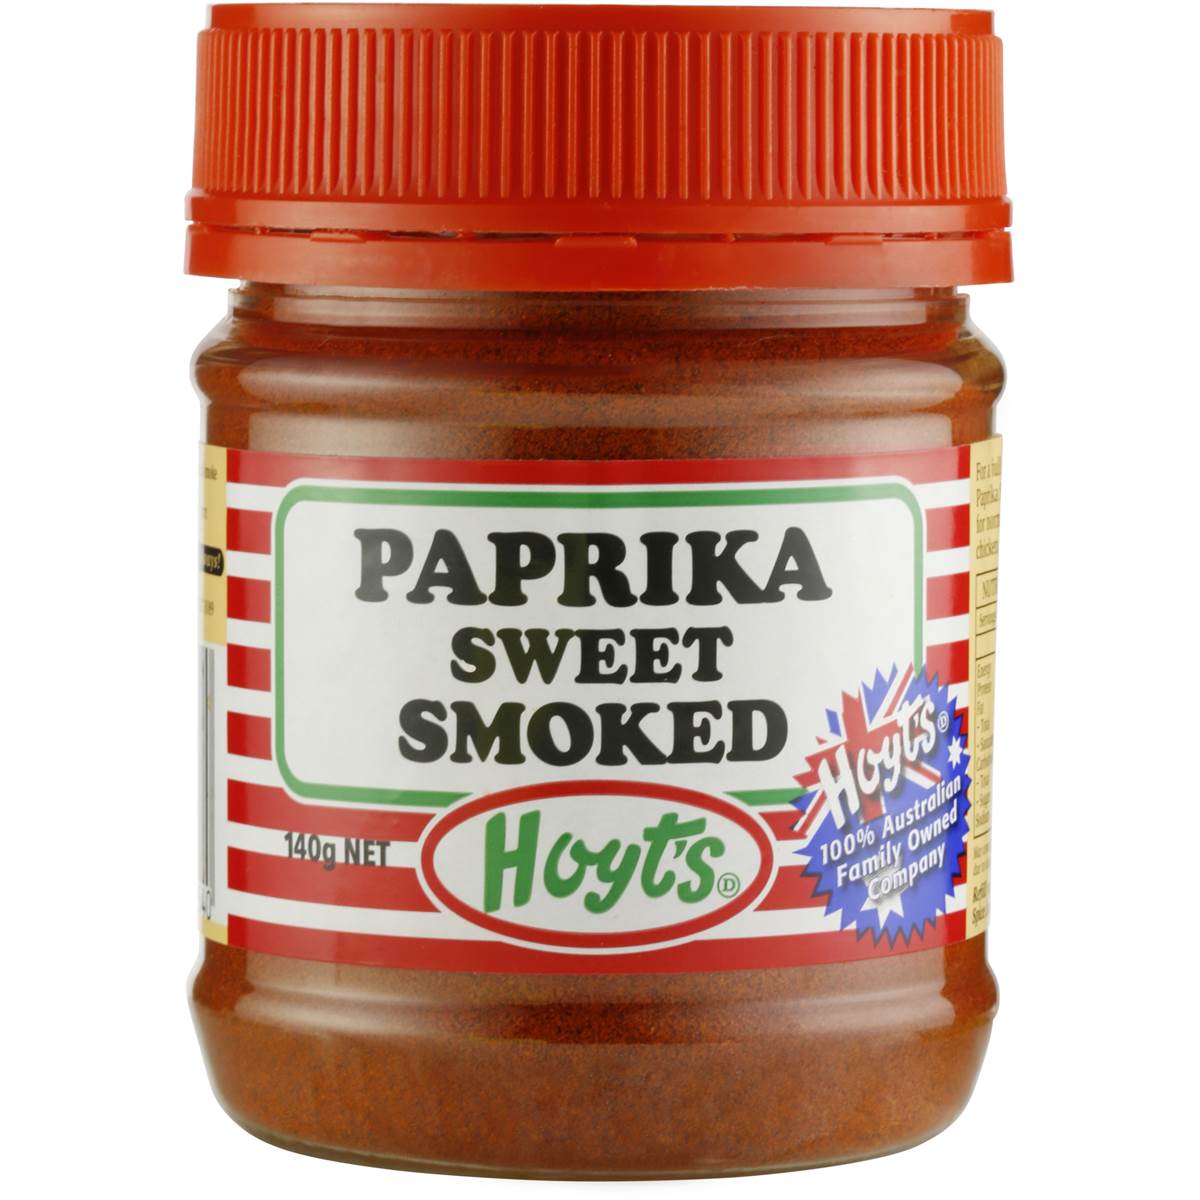 Calories in Hoyt's Paprika Sweet Smoked